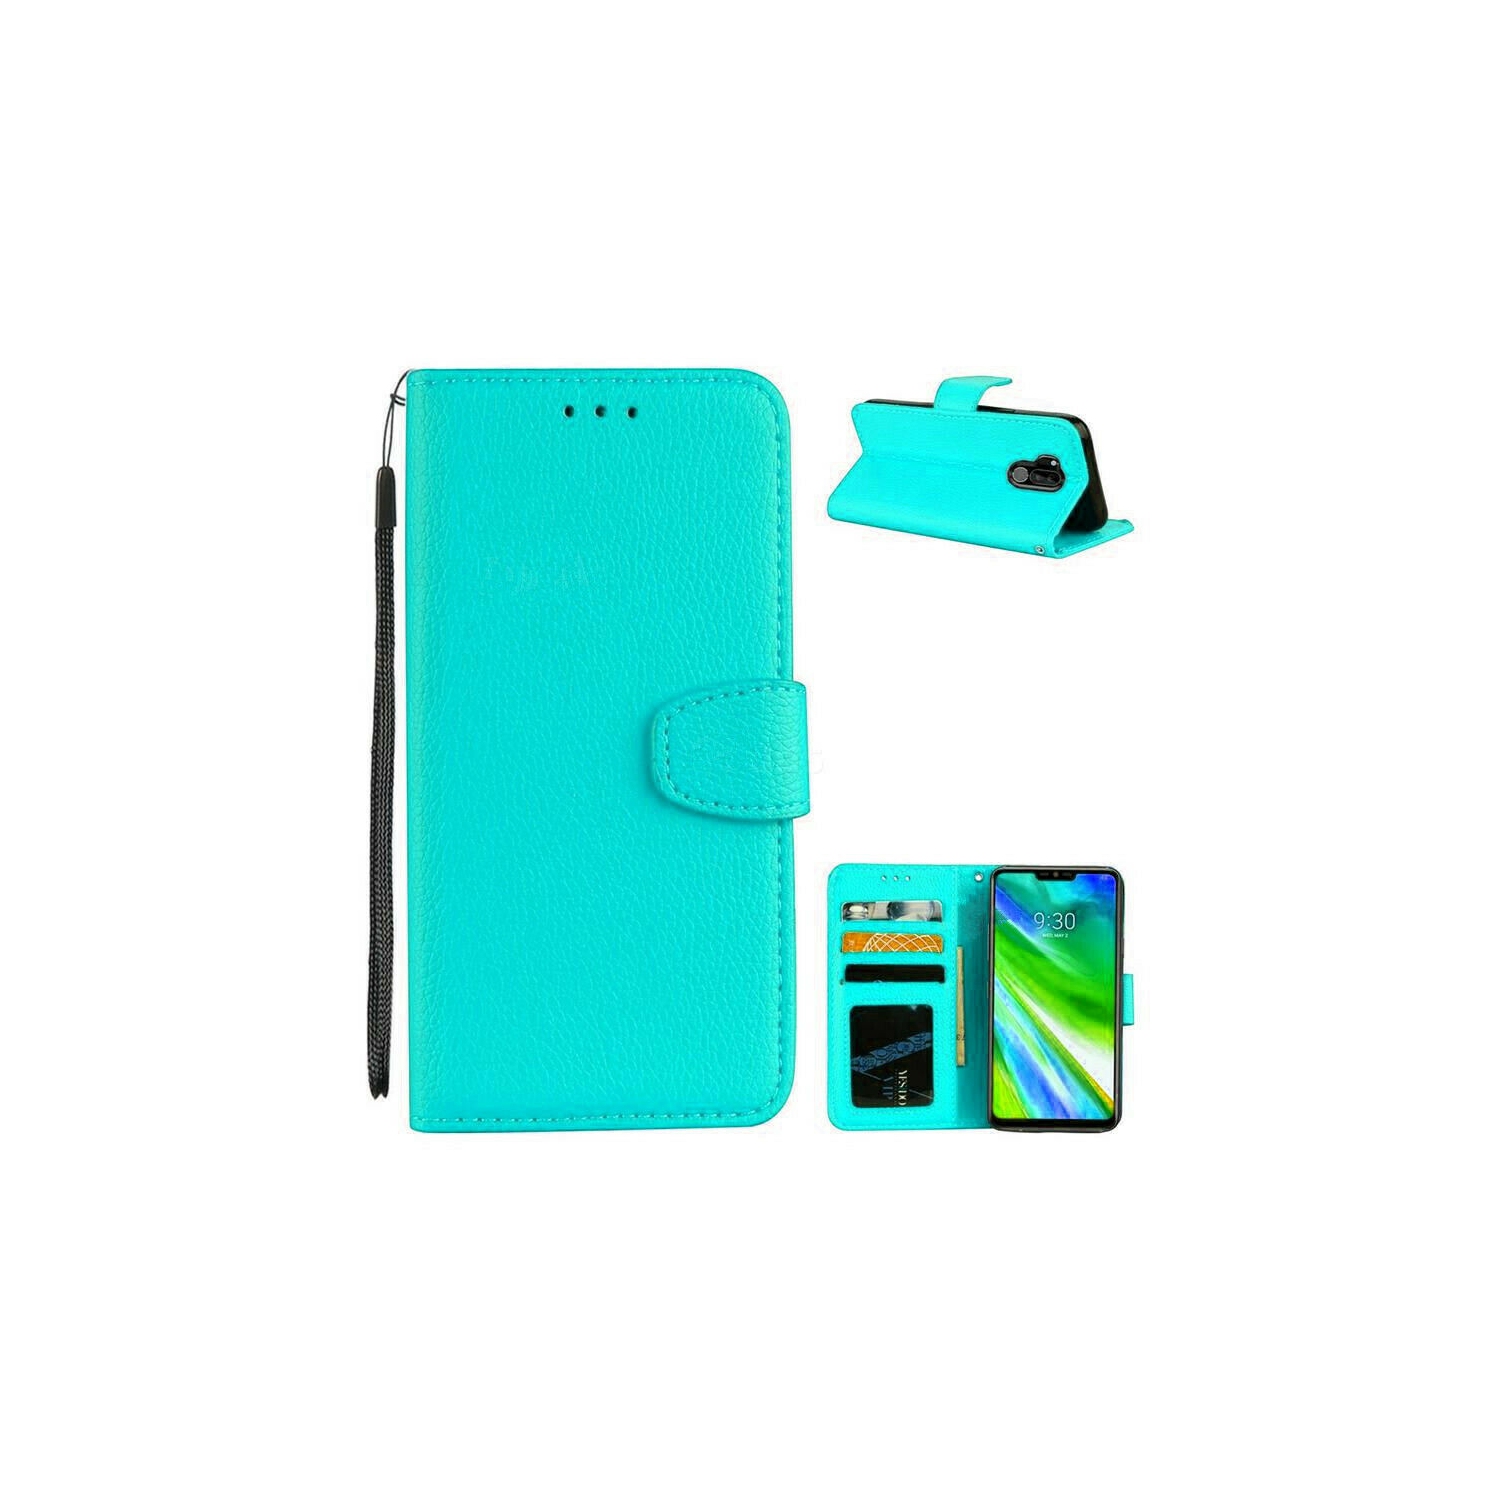 [CS] LG G7 ThinQ / G7 One Case, Magnetic Leather Folio Wallet Flip Case Cover with Card Slot, Teal